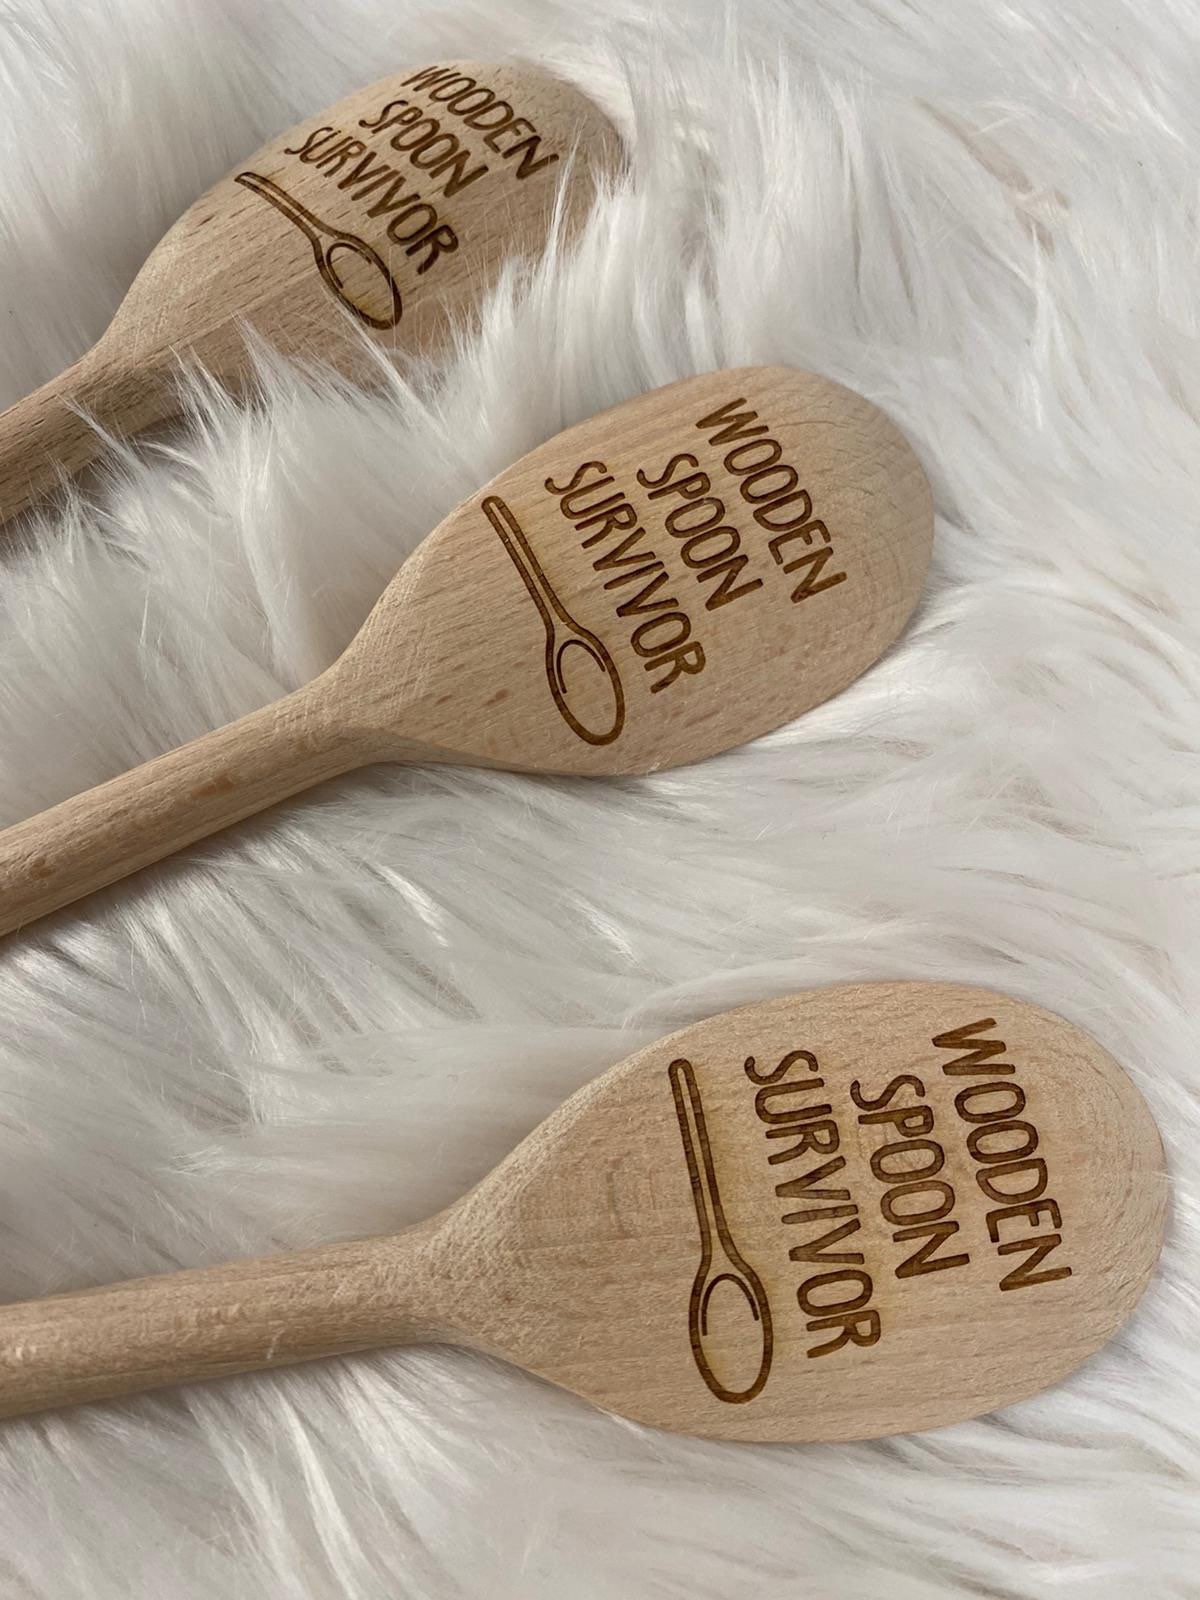 My Mukbang Obsession Taught Me to Love Wooden Spoons